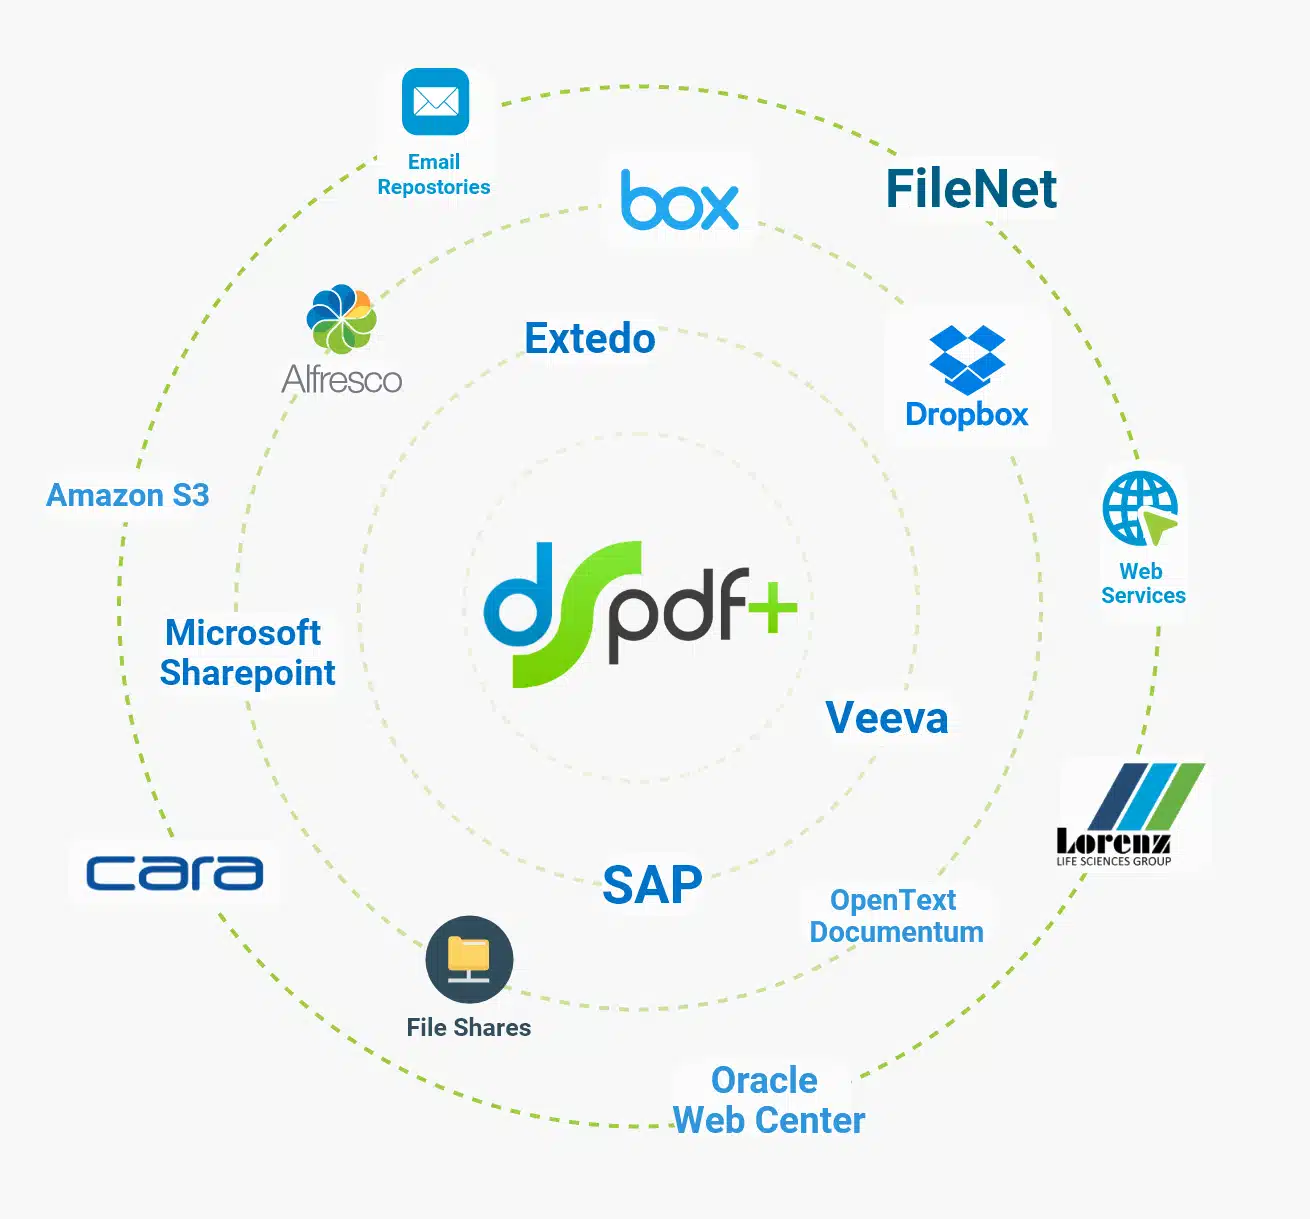 PDF-is-a-powerful-enterprise-PDF-conversion-server-and-software-that-can-connect-with-any-enterprise-document-management-system-you-have.webp